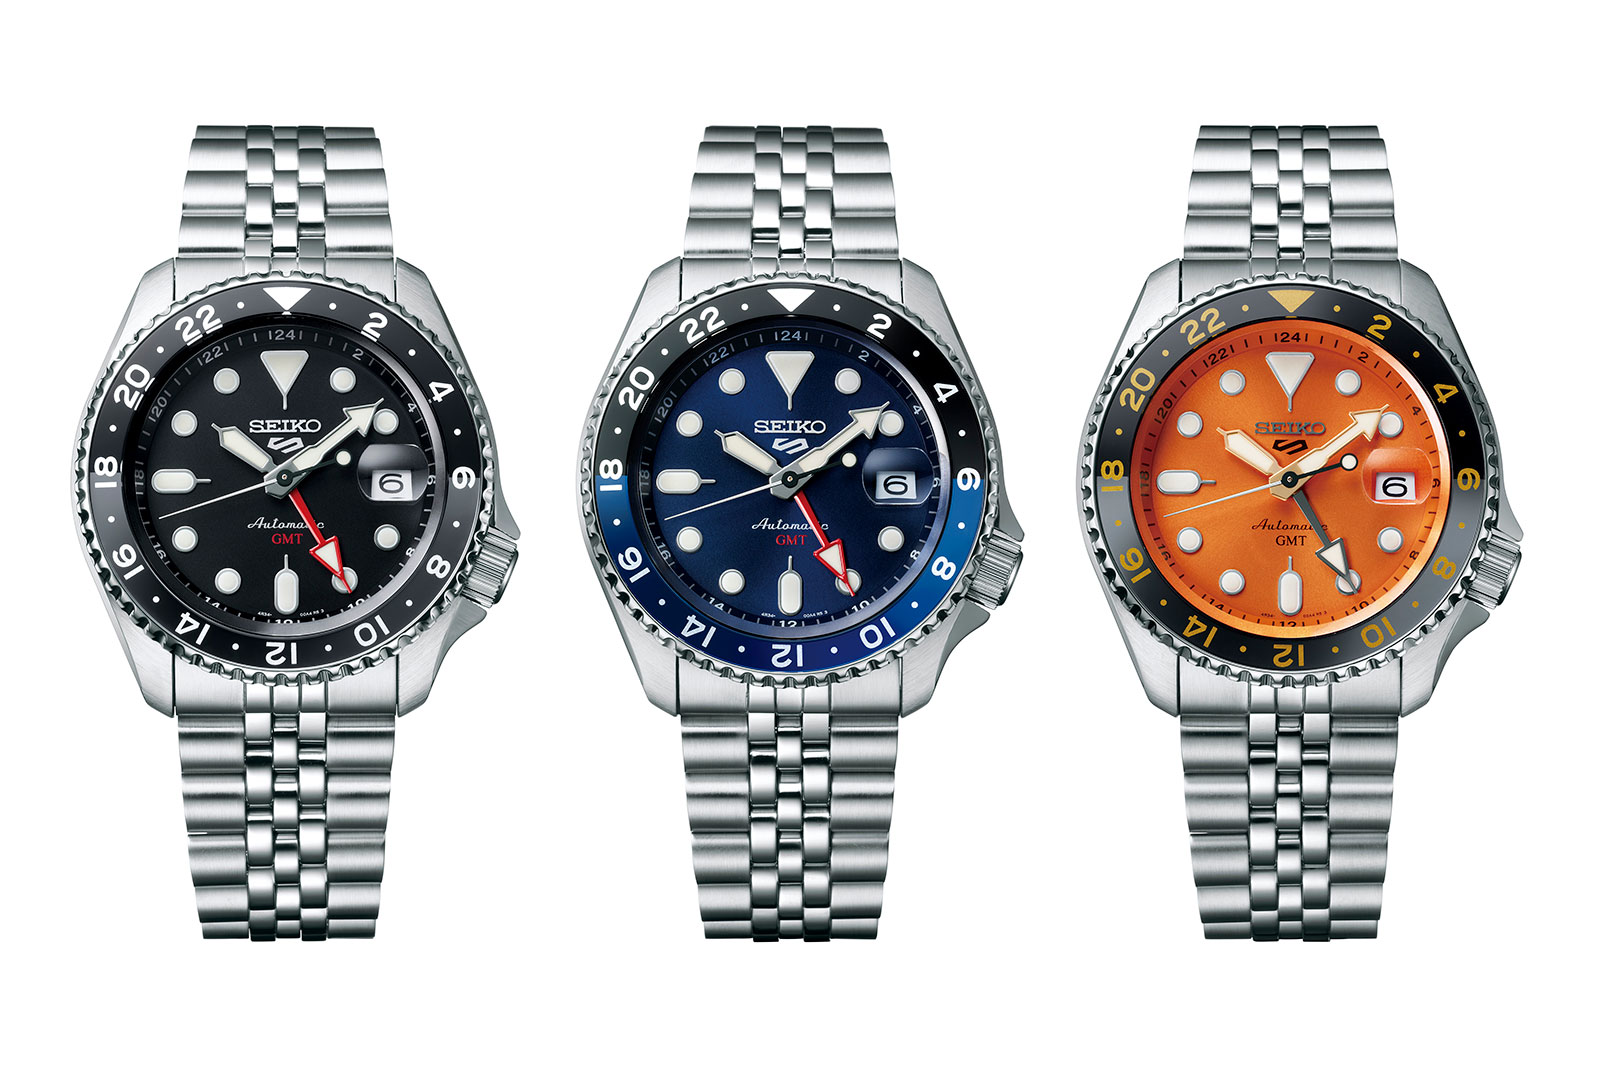 The Best Affordable GMT, Seiko 5 Sports SSK001